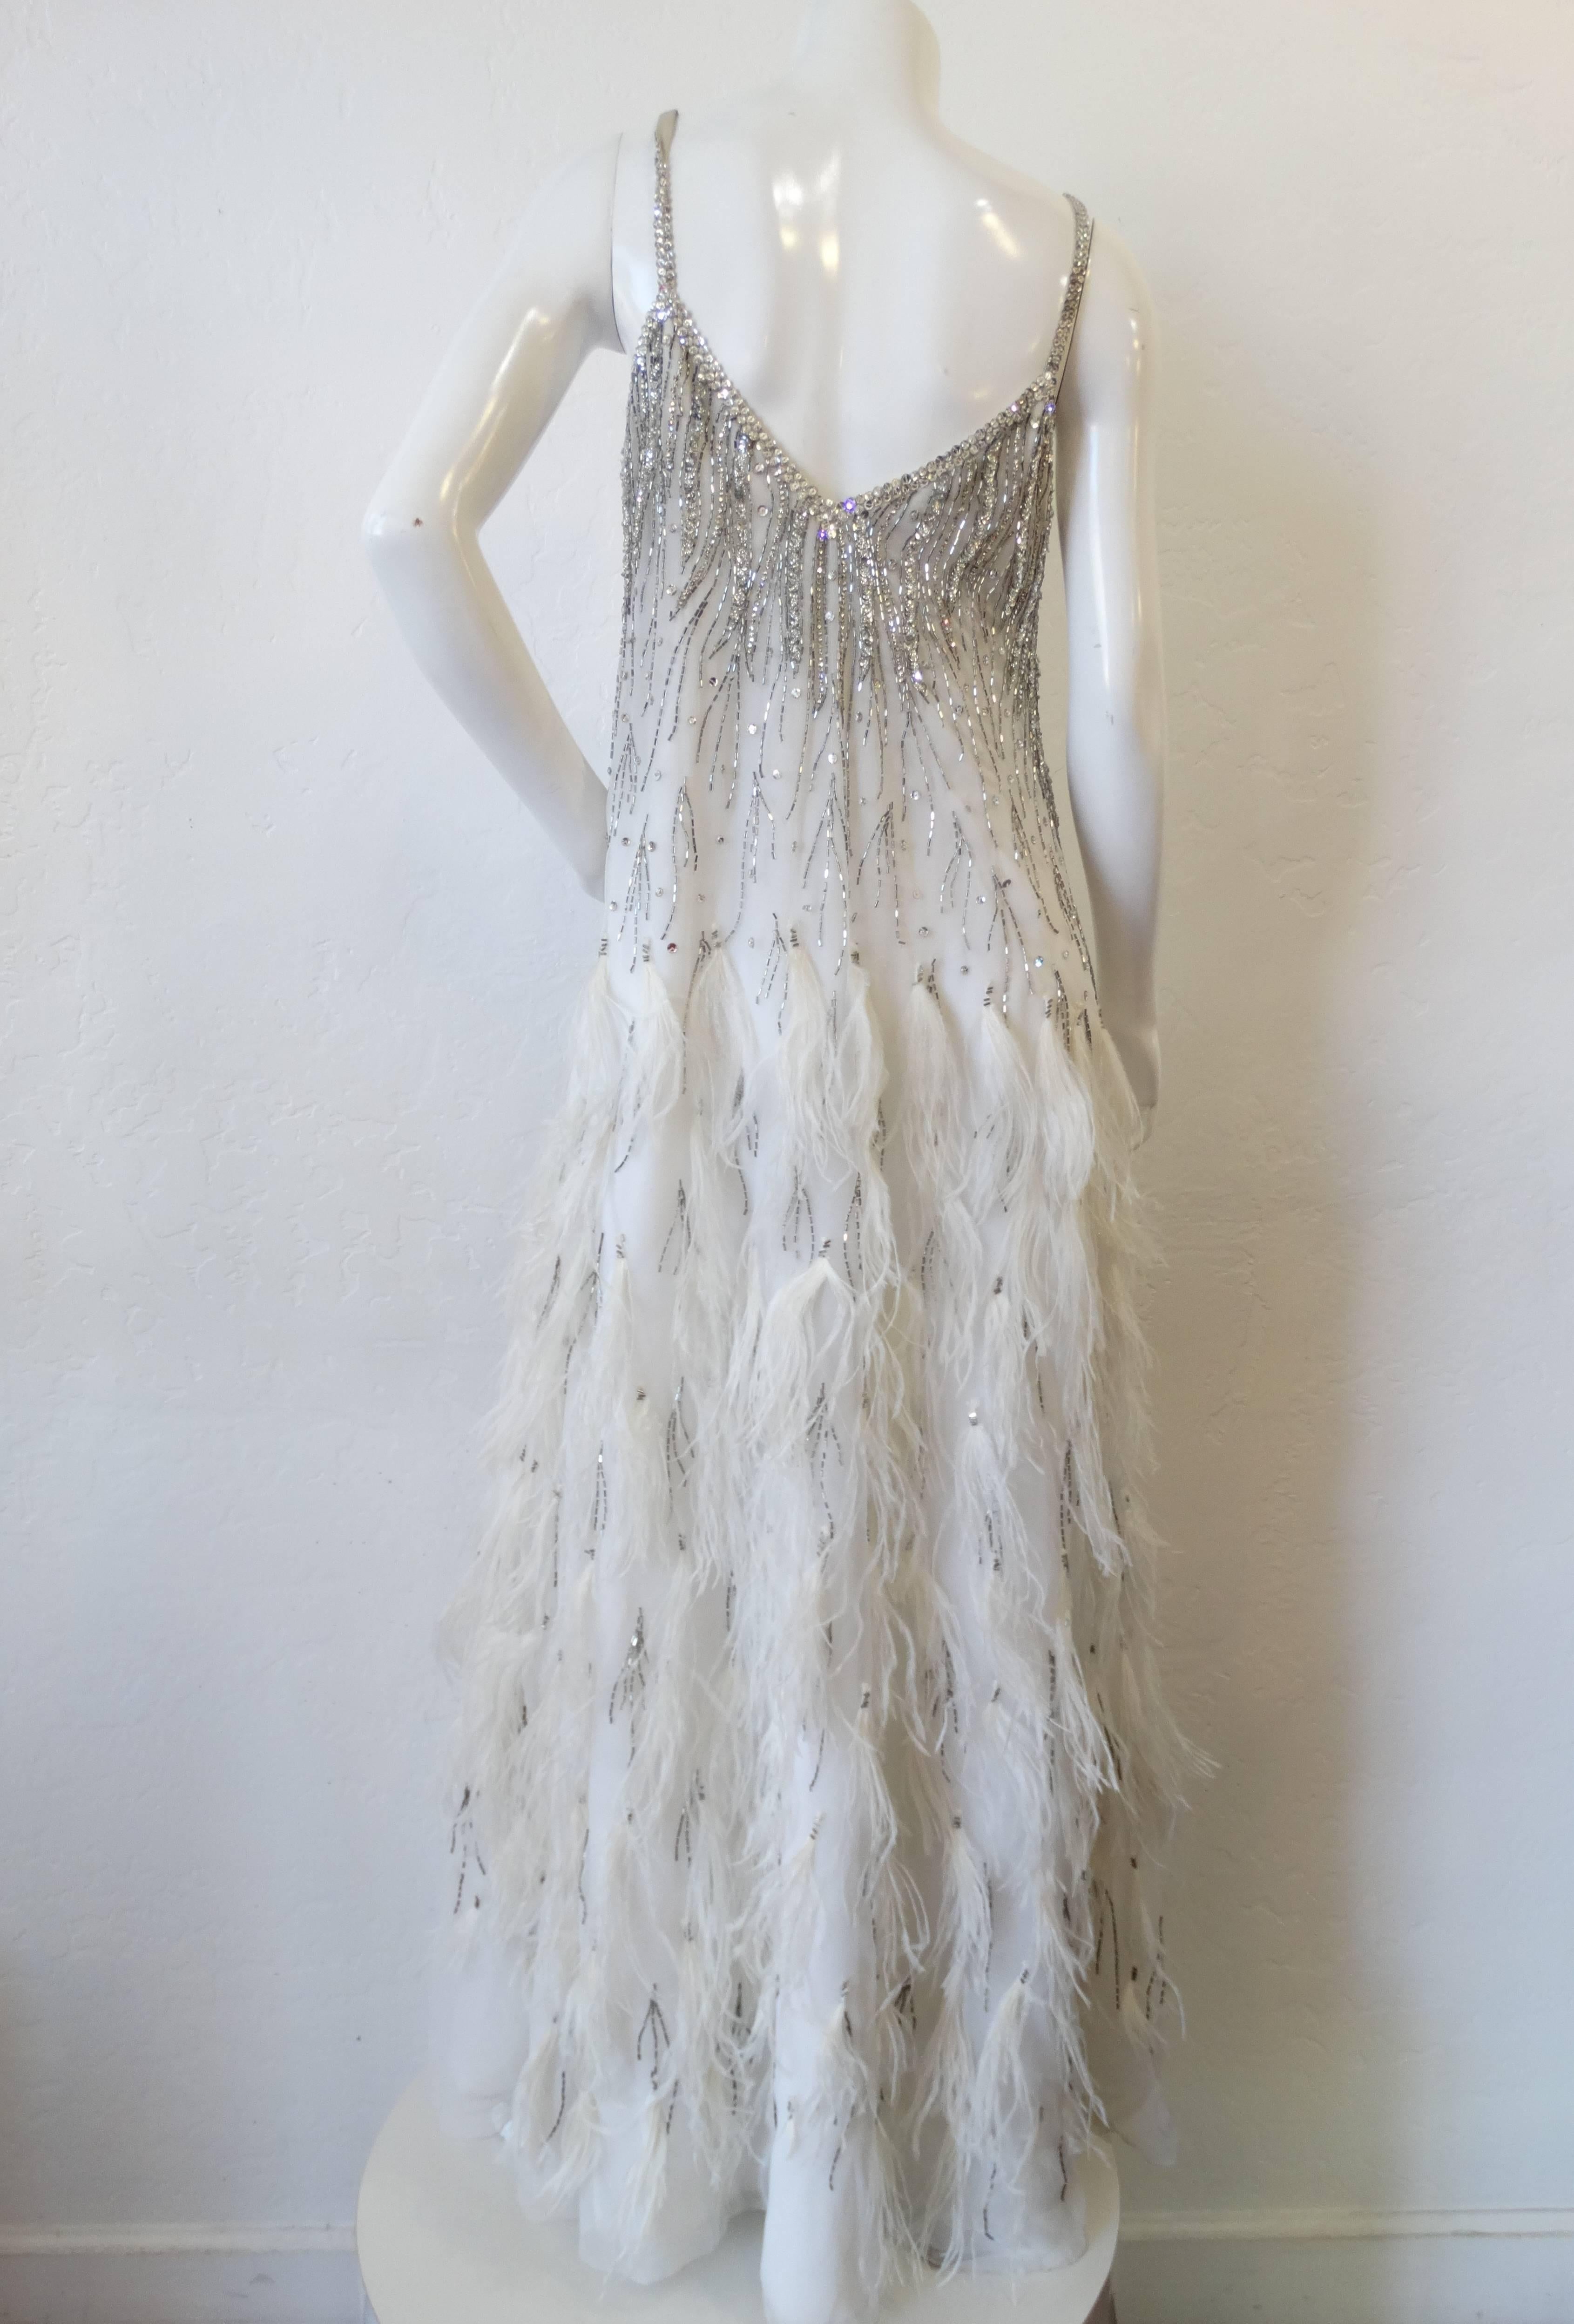 Channel the glamour of the 20s with this incredible beaded 1980s Rubin Panis Gown! Layered white chiffon cascades down to the floor- accented with a generous amount of ostrich feathers sewn in tufts. Silver beads and rhinestones stud the bodice and